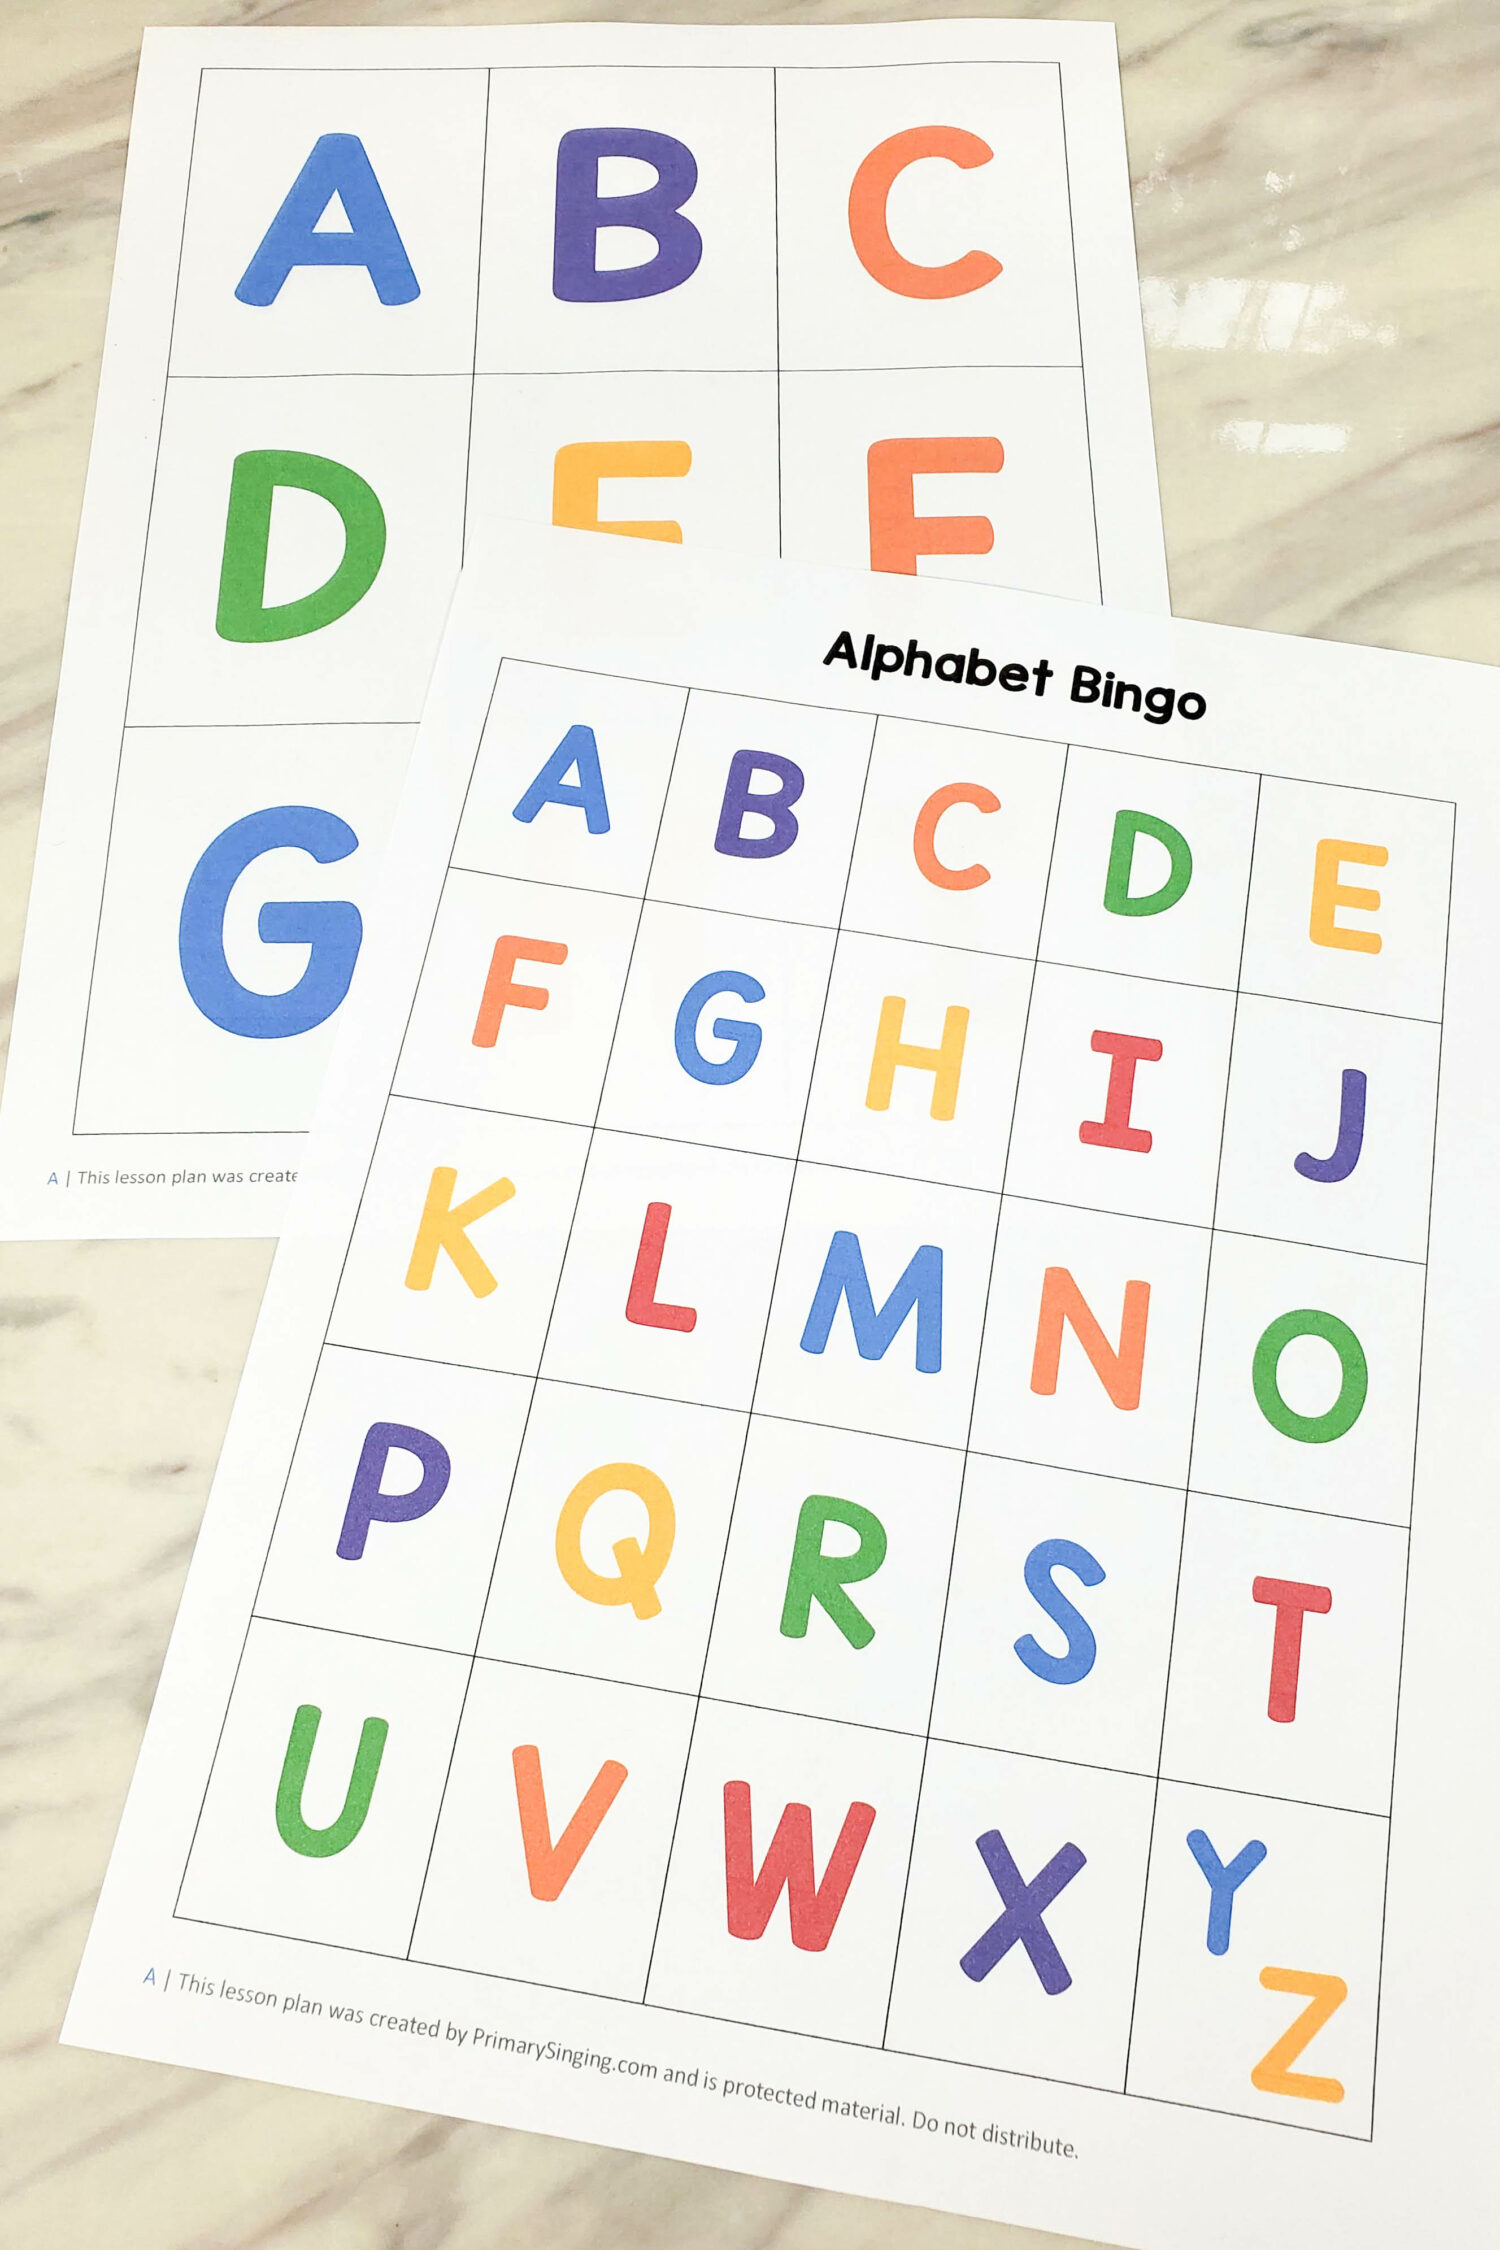 Back to School Alphabet Bingo Game - play this fun game with a matching game card in alphabetical order or mixed up game cards. Use the coordinating singing time action for each letter called or use it as a fun getting to know you game with a "favorites" question for each letter! Includes printable song helps for LDS Primary music leaders or great for a classroom activity for teachers.